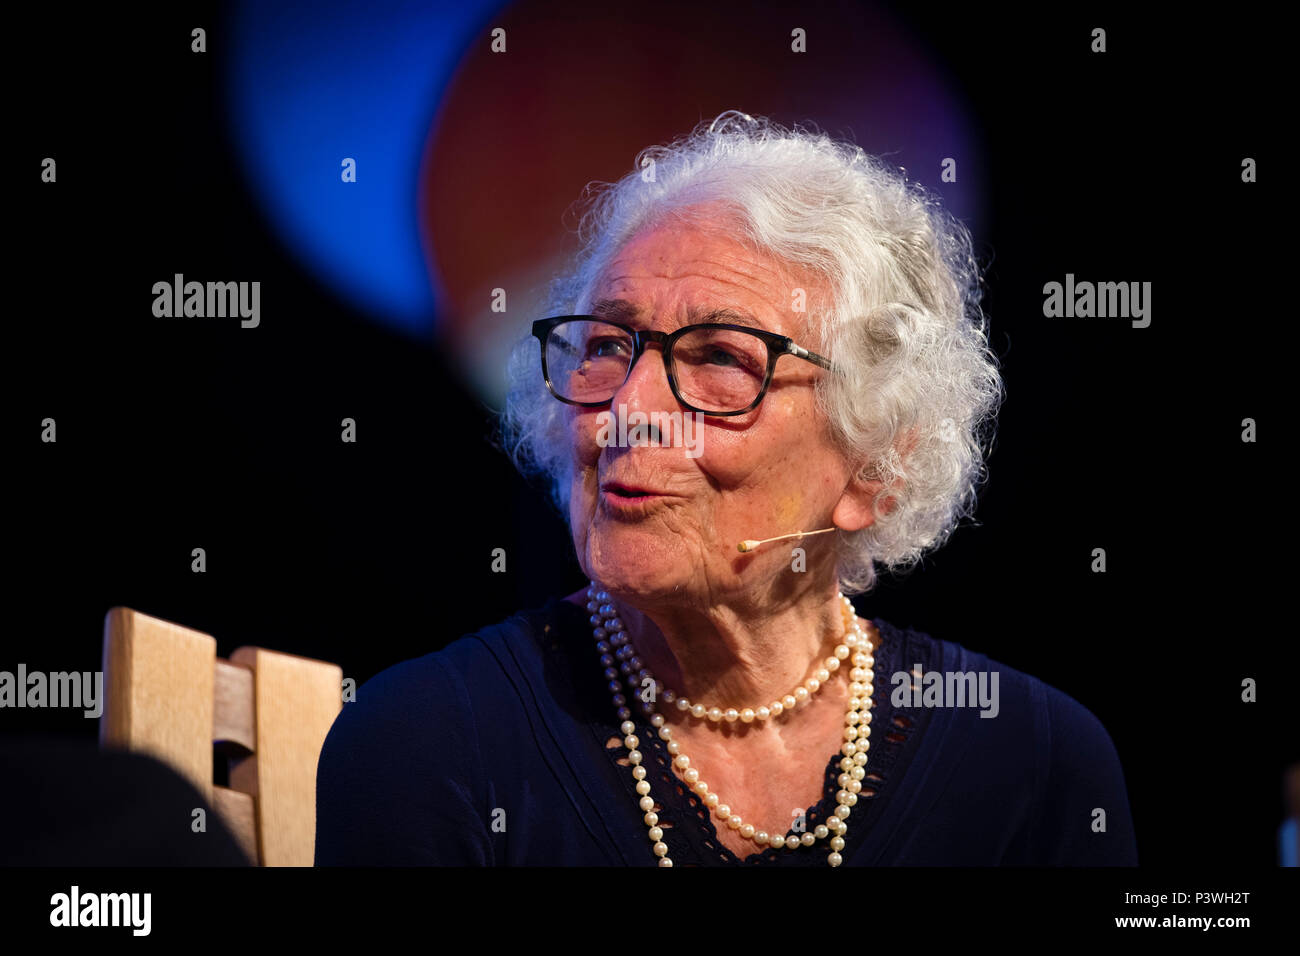 Judith Kerr, British writer and illustrator. She has created both enduring picture books such as the Mog series and The Tiger Who Came to Tea and acclaimed novels for older children such as the semi-autobiographical When Hitler Stole Pink Rabbit, which gave a child's-eye view of the Second World War. Born in Germany, of Jewish background, she came to Britain with her family in 1933 amid the rise of the Nazis..  Pictured at the 2018 Hay Festival of Literature and the Arts.  The annual festival  in the small town of Hay on Wye on the Welsh borders , attracts  writers and thinkers from across the Stock Photo